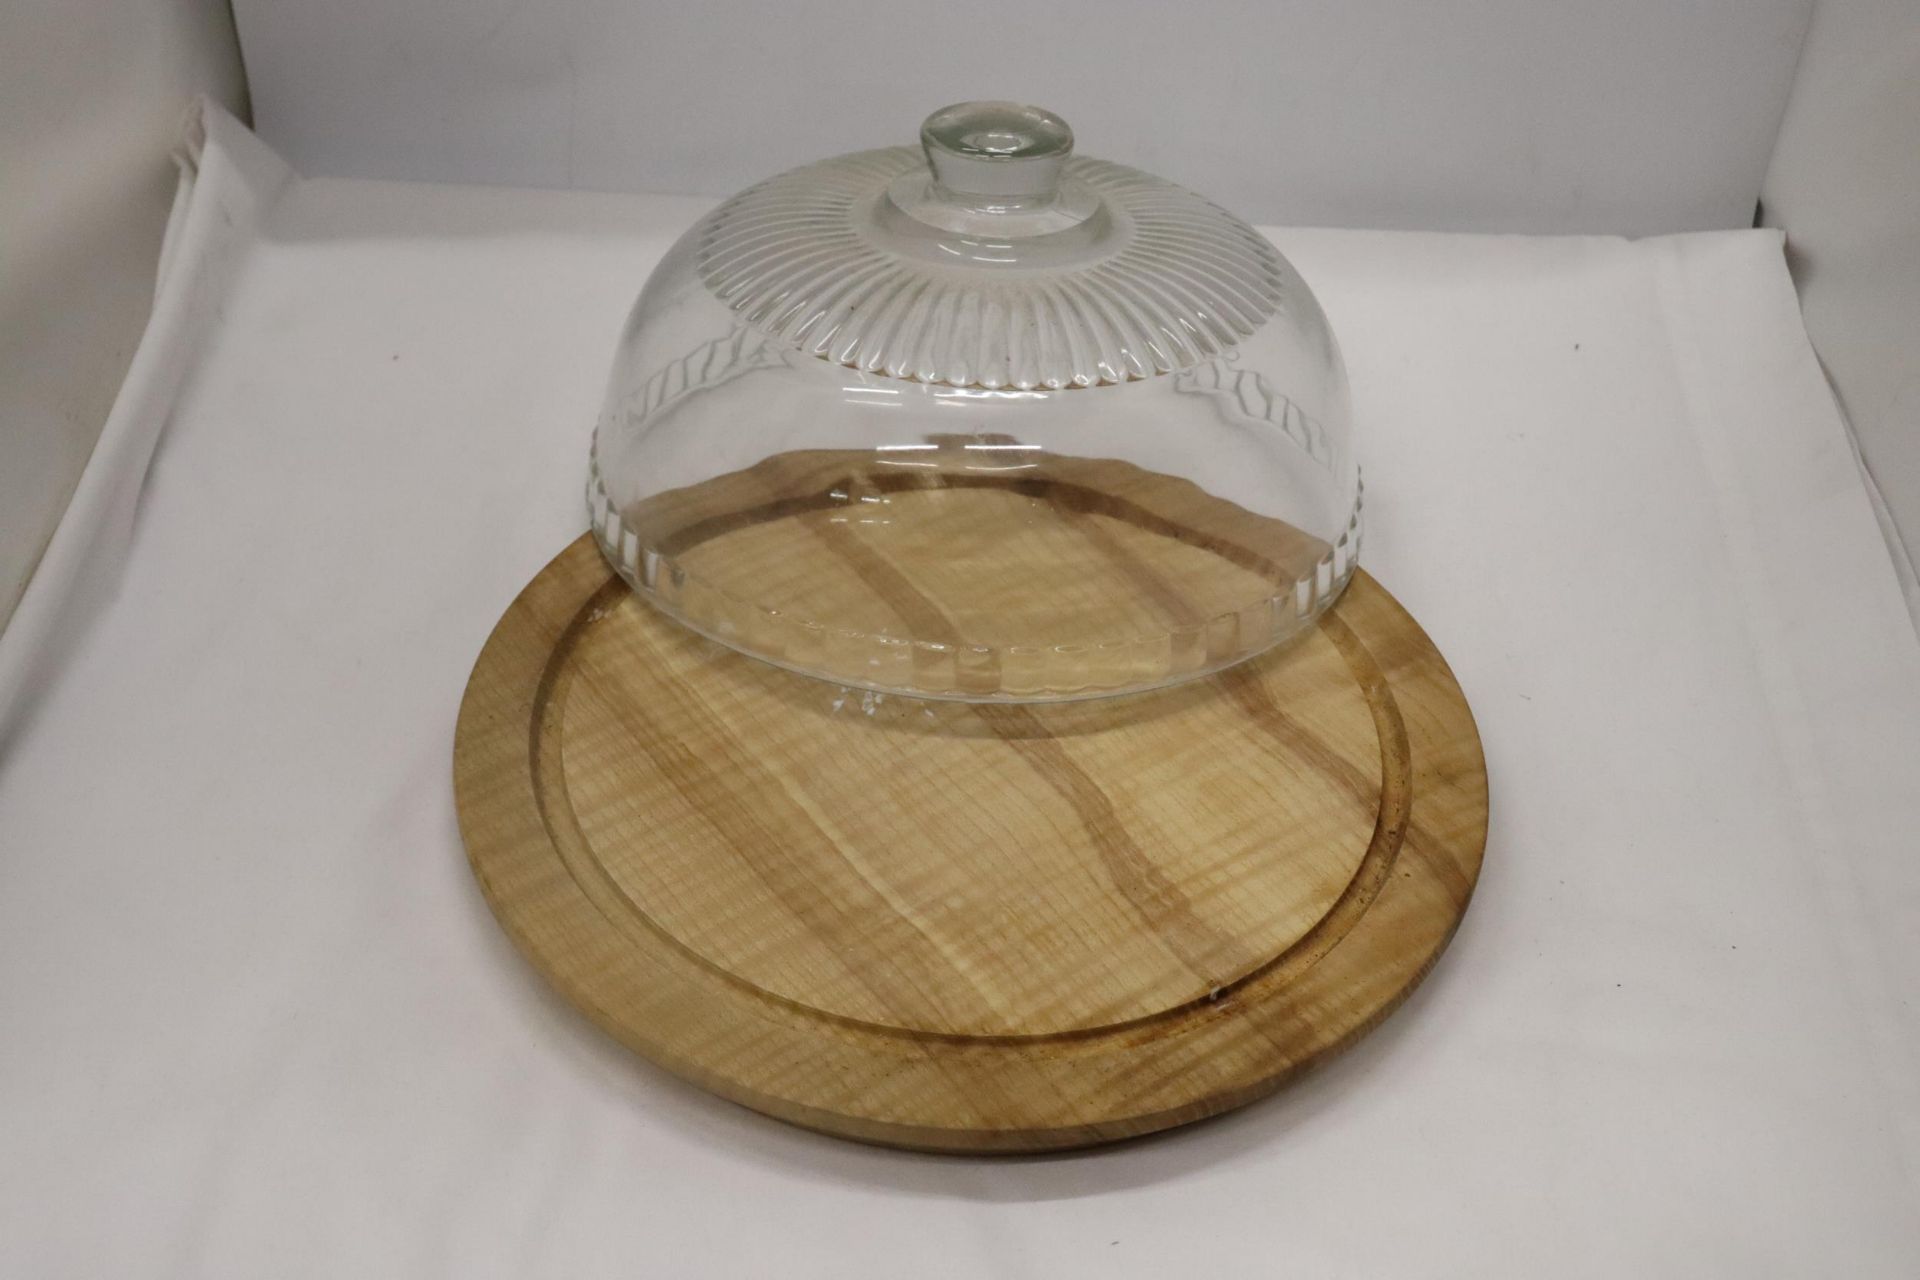 A VINTAGE WOODEN CAKE/CHEESE BOARD WITH GLASS DOME - Image 3 of 5